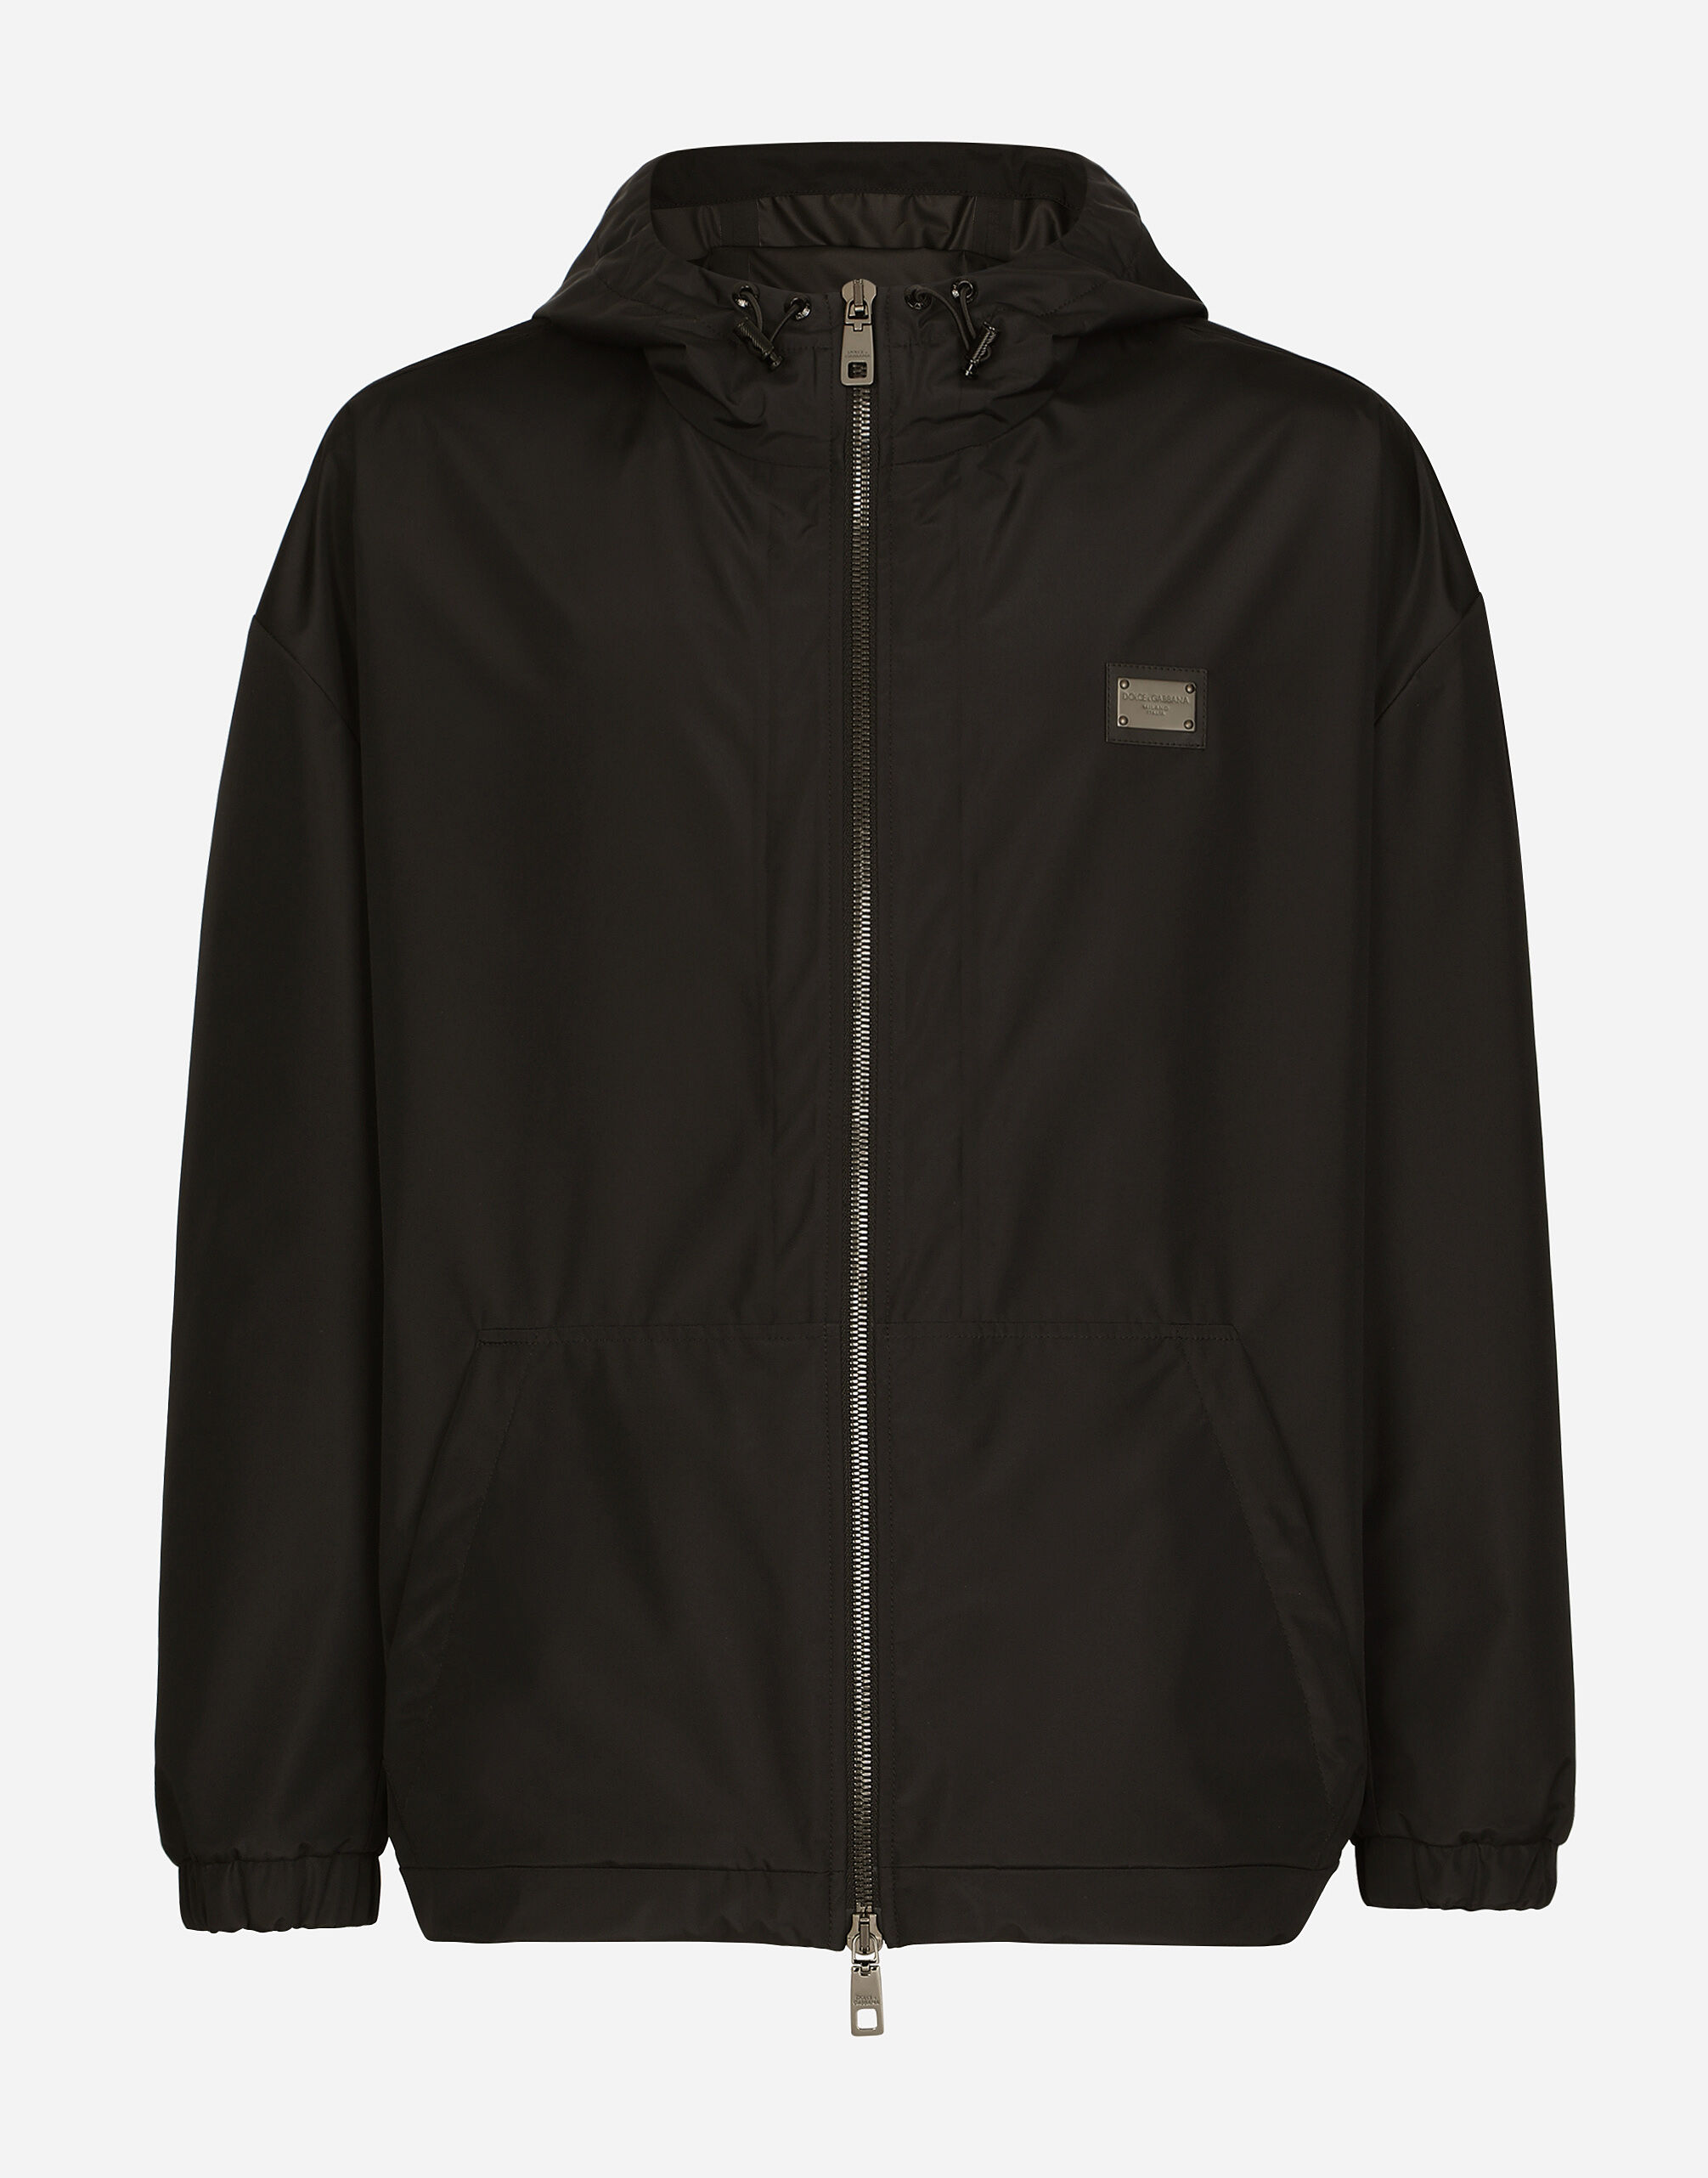 Nylon jacket with hood and branded tag